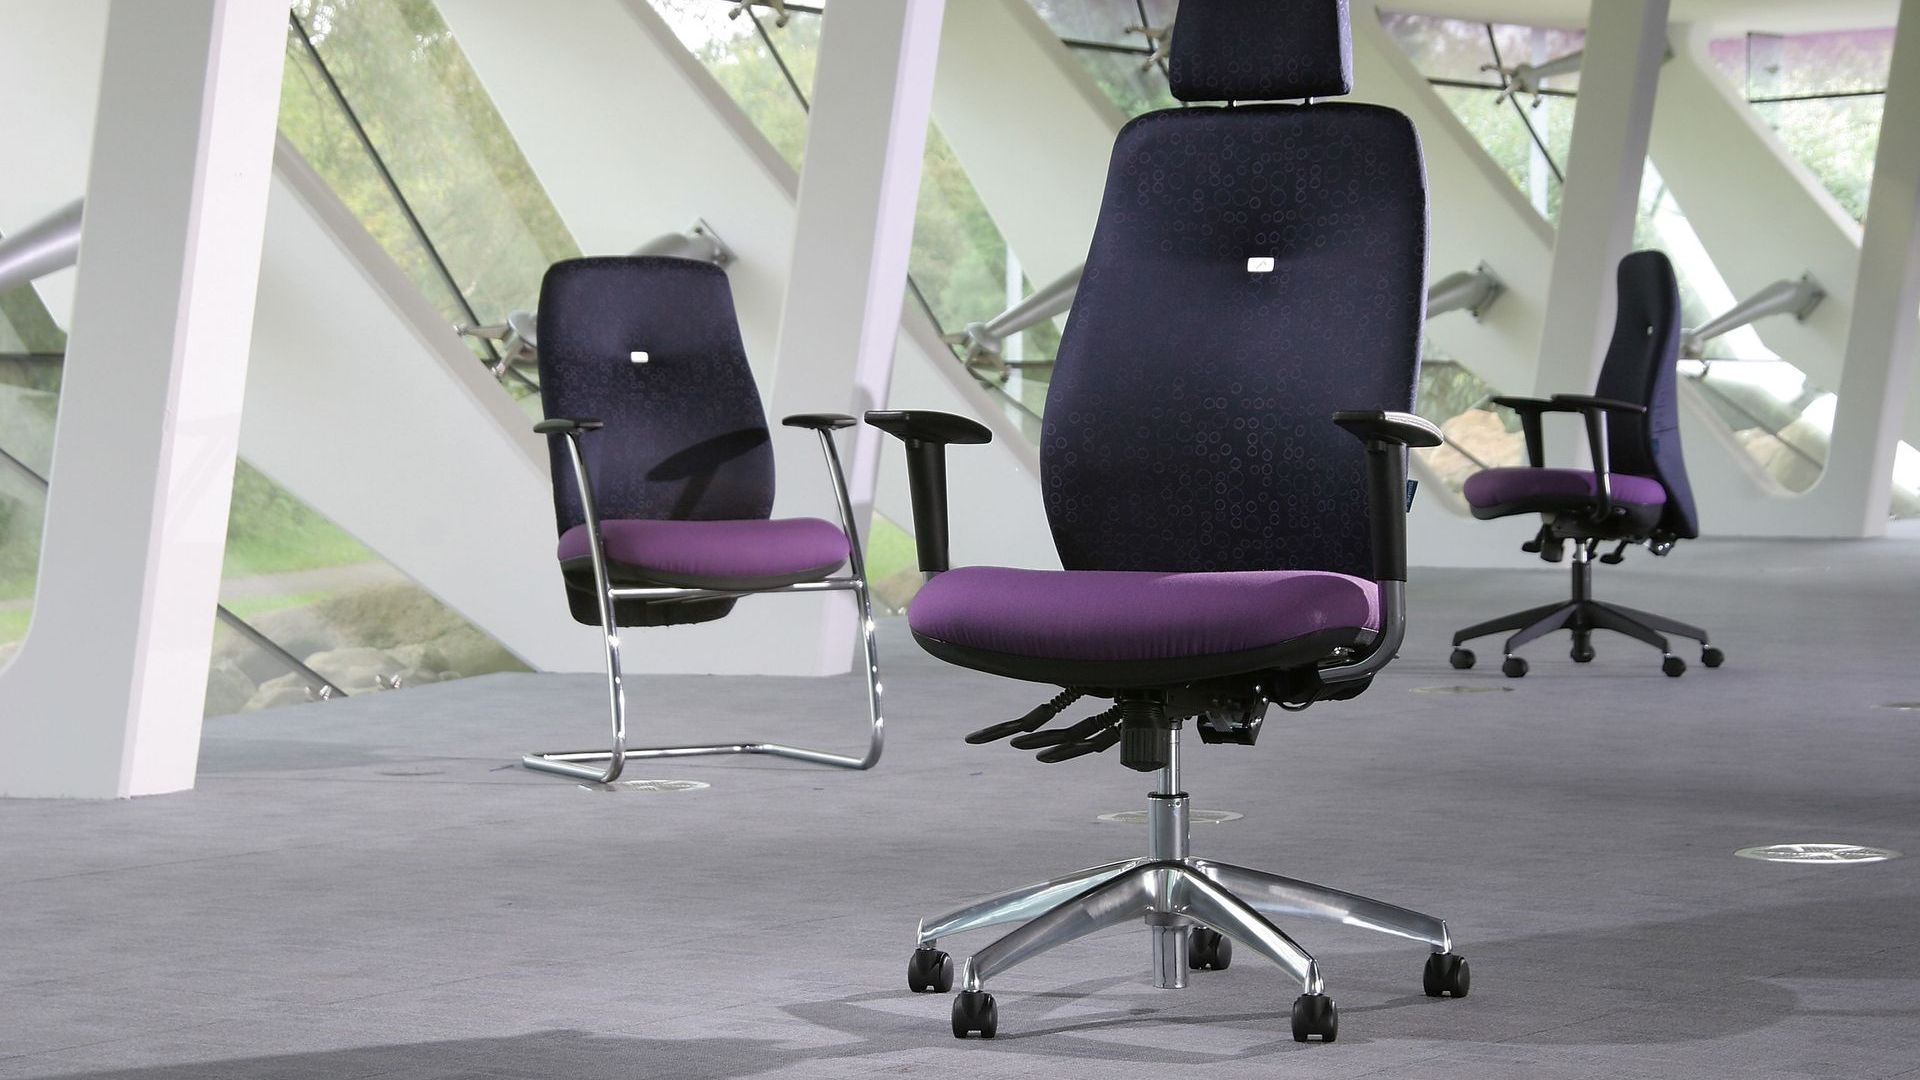 summit inflexion chairs in a large studio space. the chair seats are purple and the back of the chairs are a dark indigo colour. 